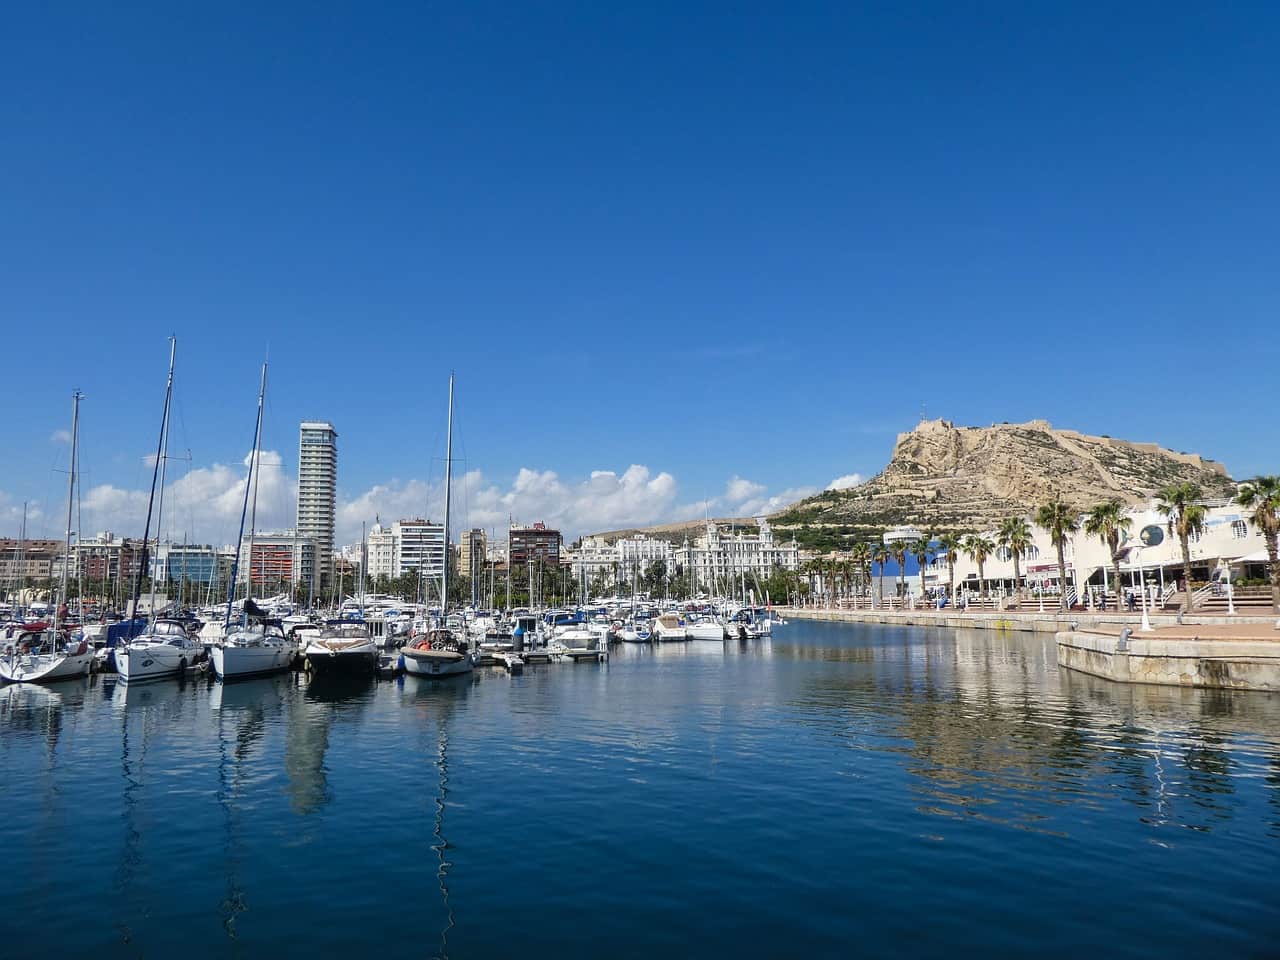 Why should we choose Alicante as the place to undertake a fertility program?